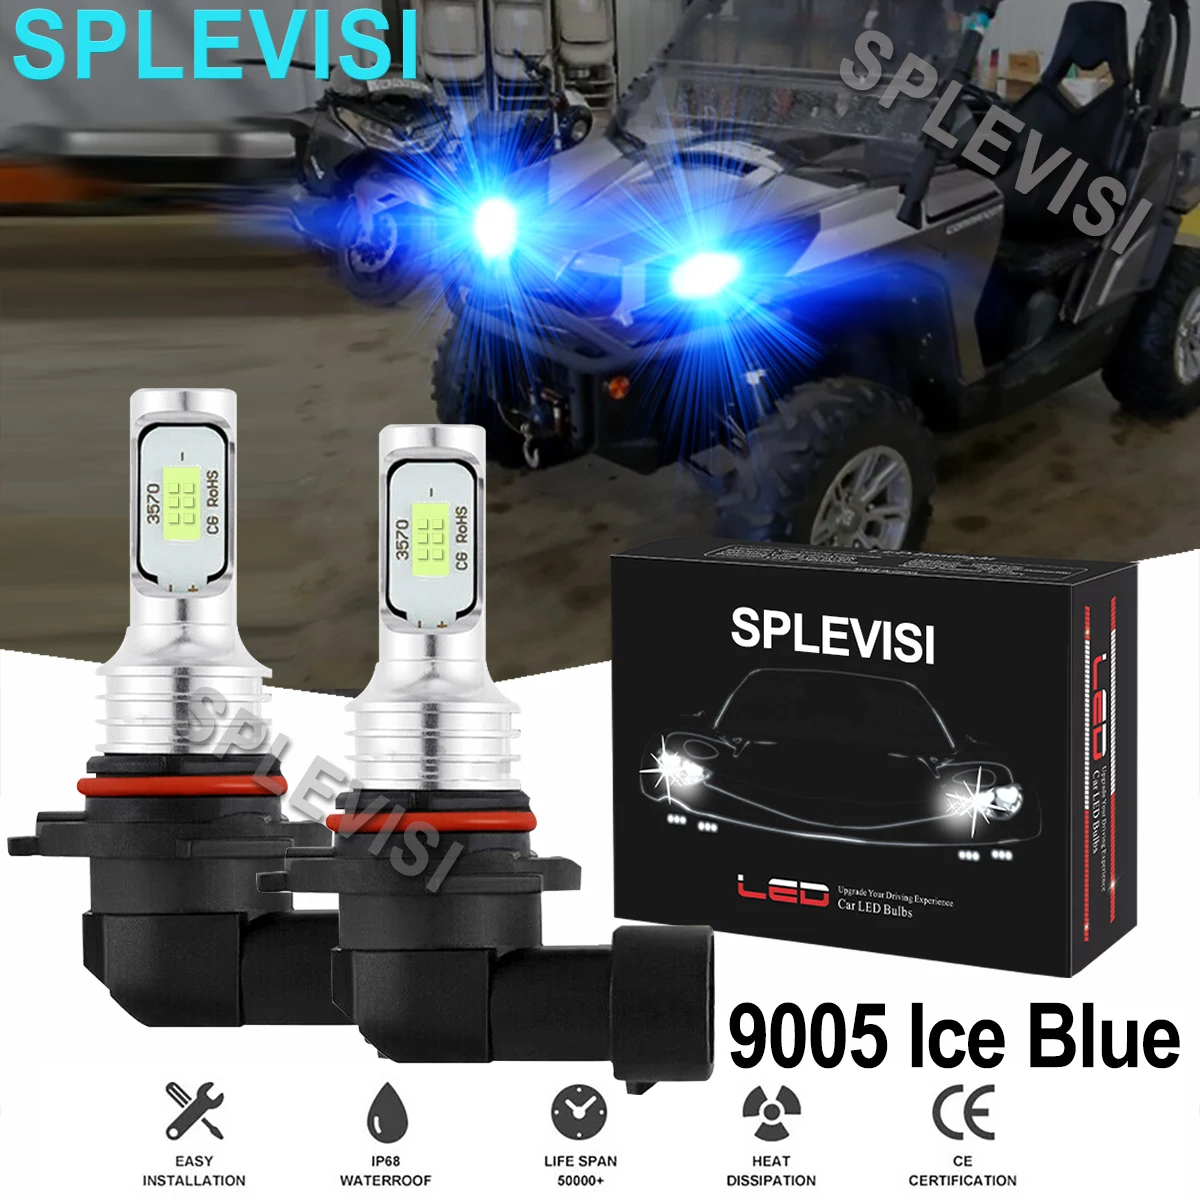 2x70W 8000K Ice Blue LED 9005 HB3 Headlights Kit  For Can Am Commander 1000 2011 2012 2013 2014 2015 2016-2019 1000R 2018-2019